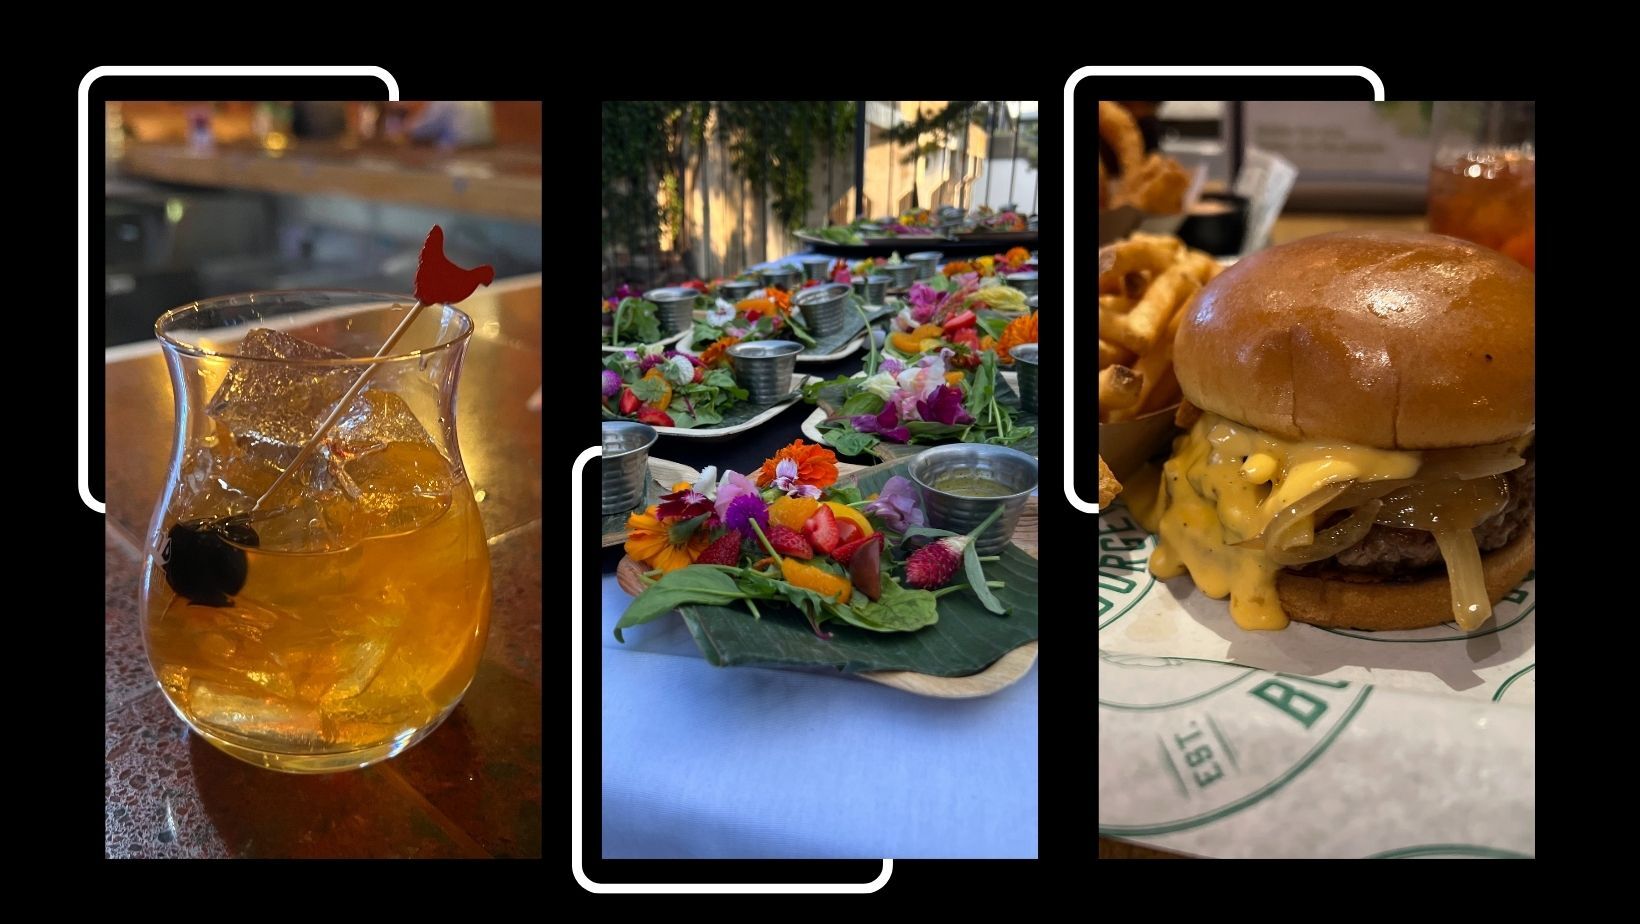 Three vertical photos on a black background: left is a cocktail with a red rooster toothpick; middle is a tablescape with plates with fruit and edible flower salad; right is a cheesburger.